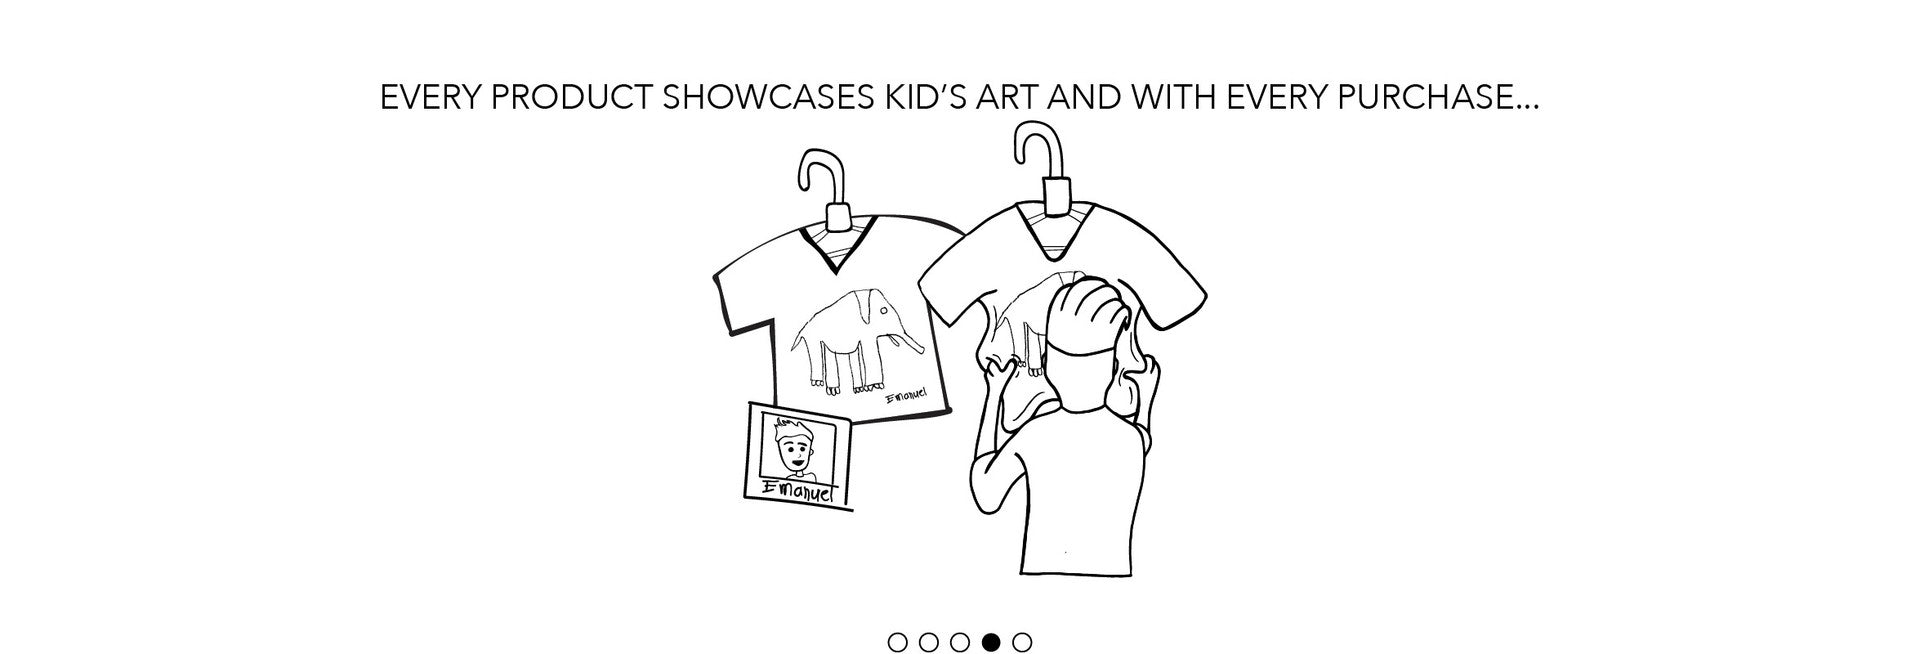 every product showcases kid's art, and with every purchase...